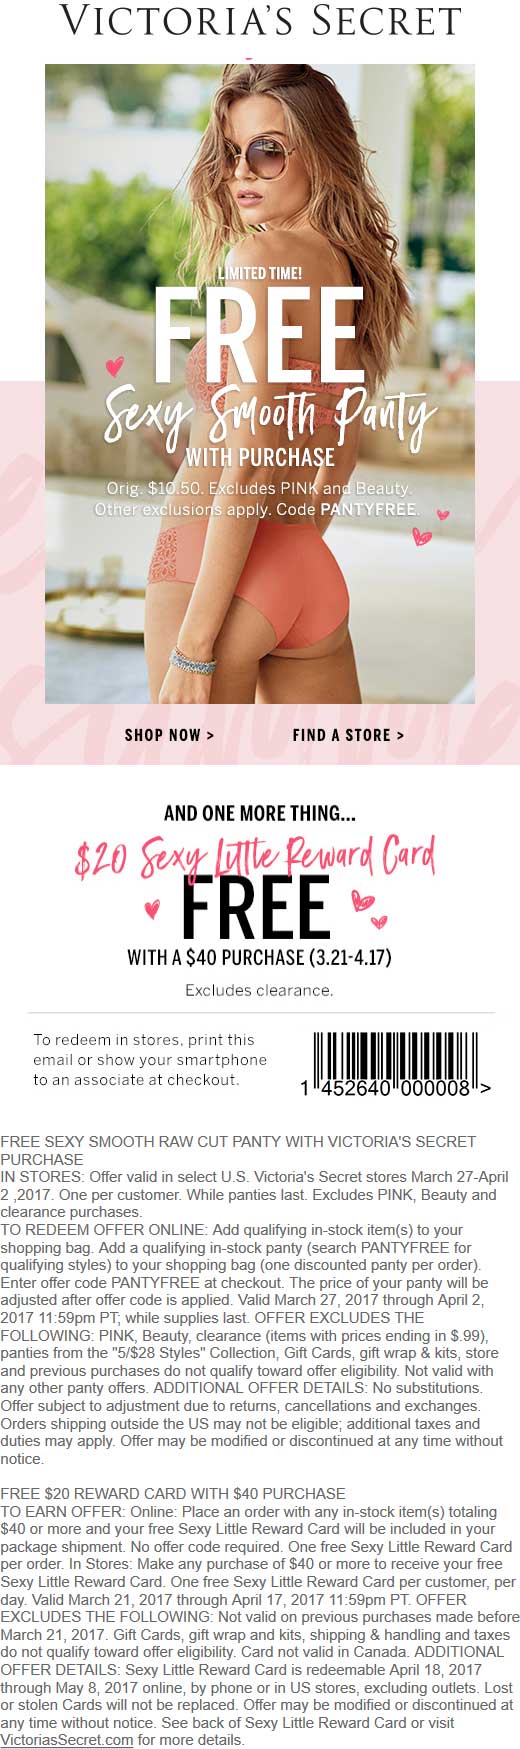 Victorias Secret Coupon April 2024 $10 panty free with any purchase + $20 reward card on $40 spent at Victorias Secret, or online via promo code PANTYFREE